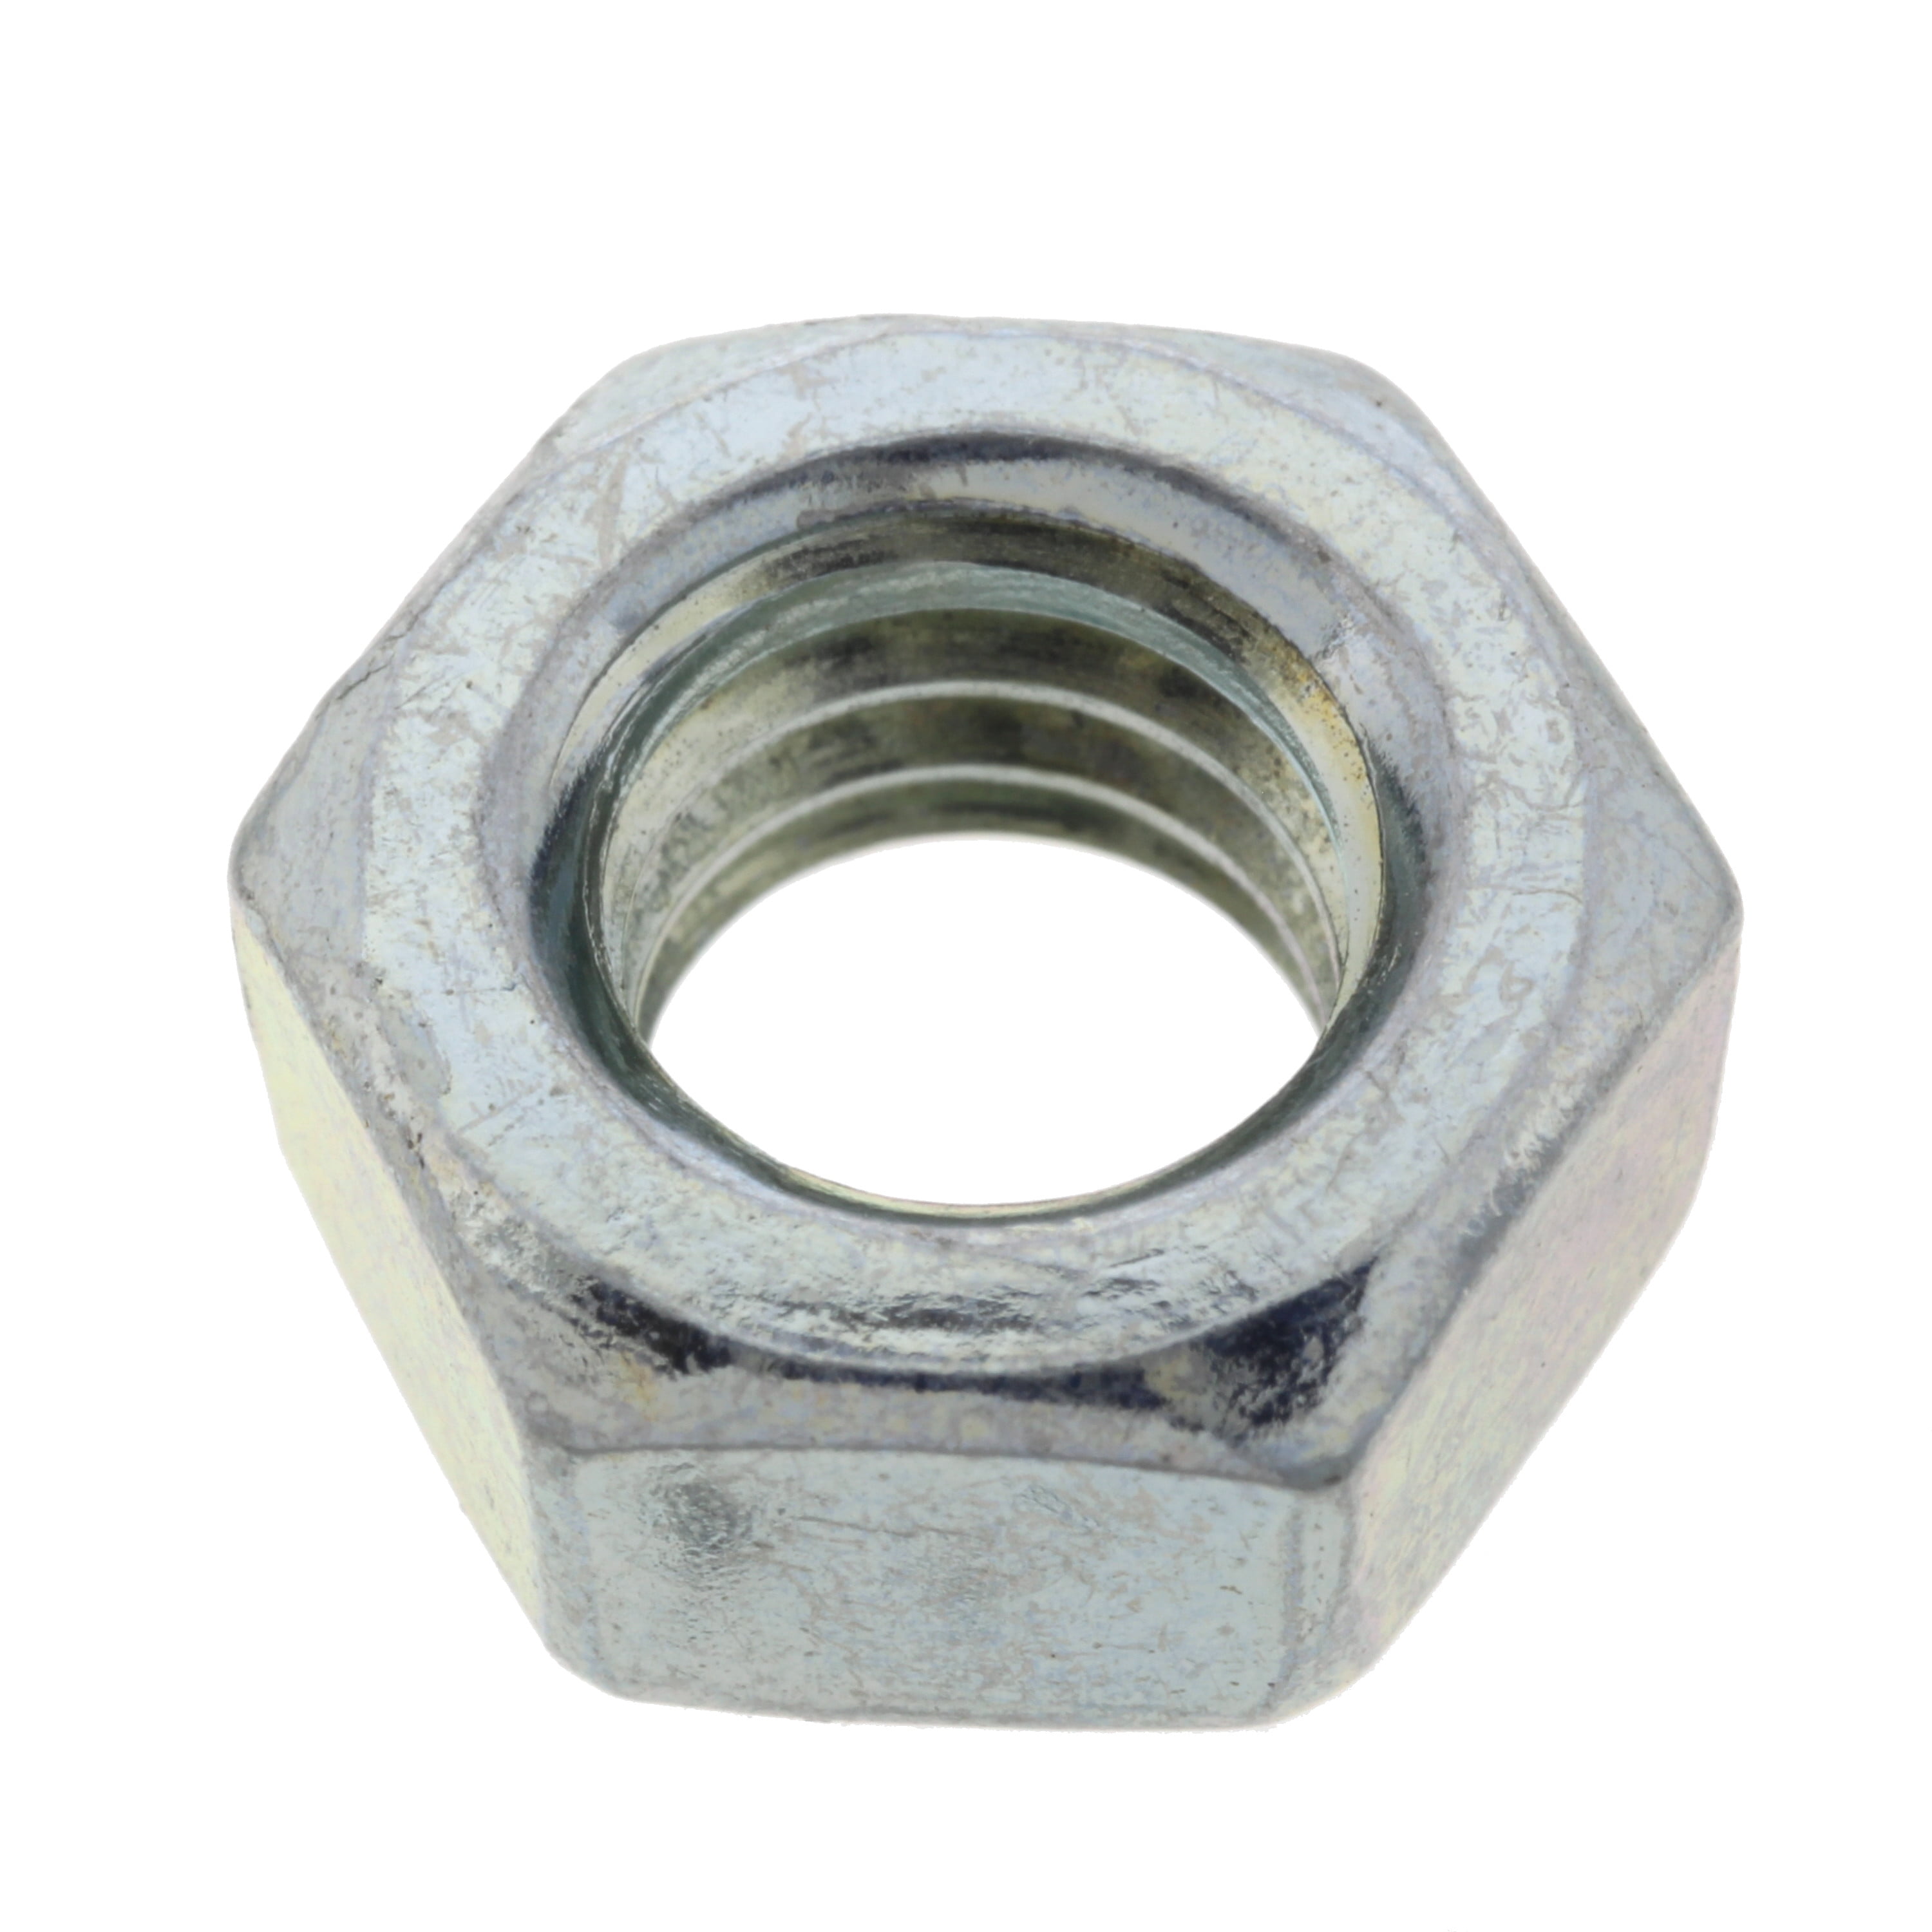 5/16-18 Grade 8 Finish Hex Nuts Yellow Zinc Plated Hardened Qty 100 